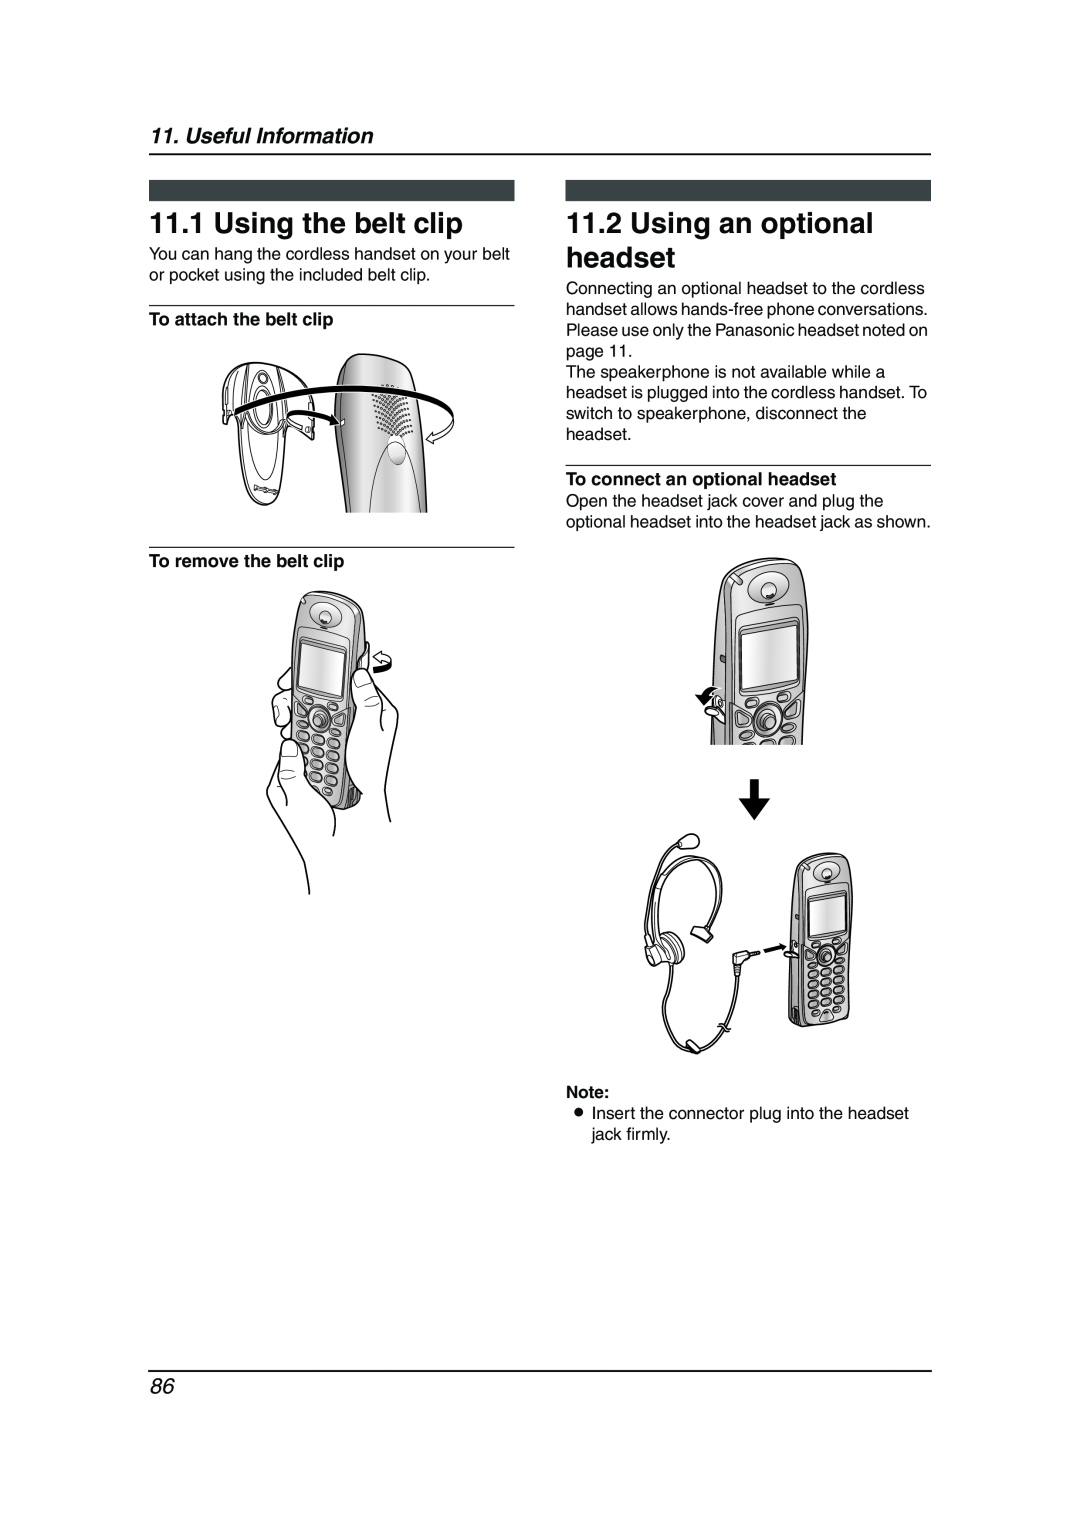 Panasonic KX-FC241AL Using the belt clip, Using an optional headset, Useful Information, To connect an optional headset 